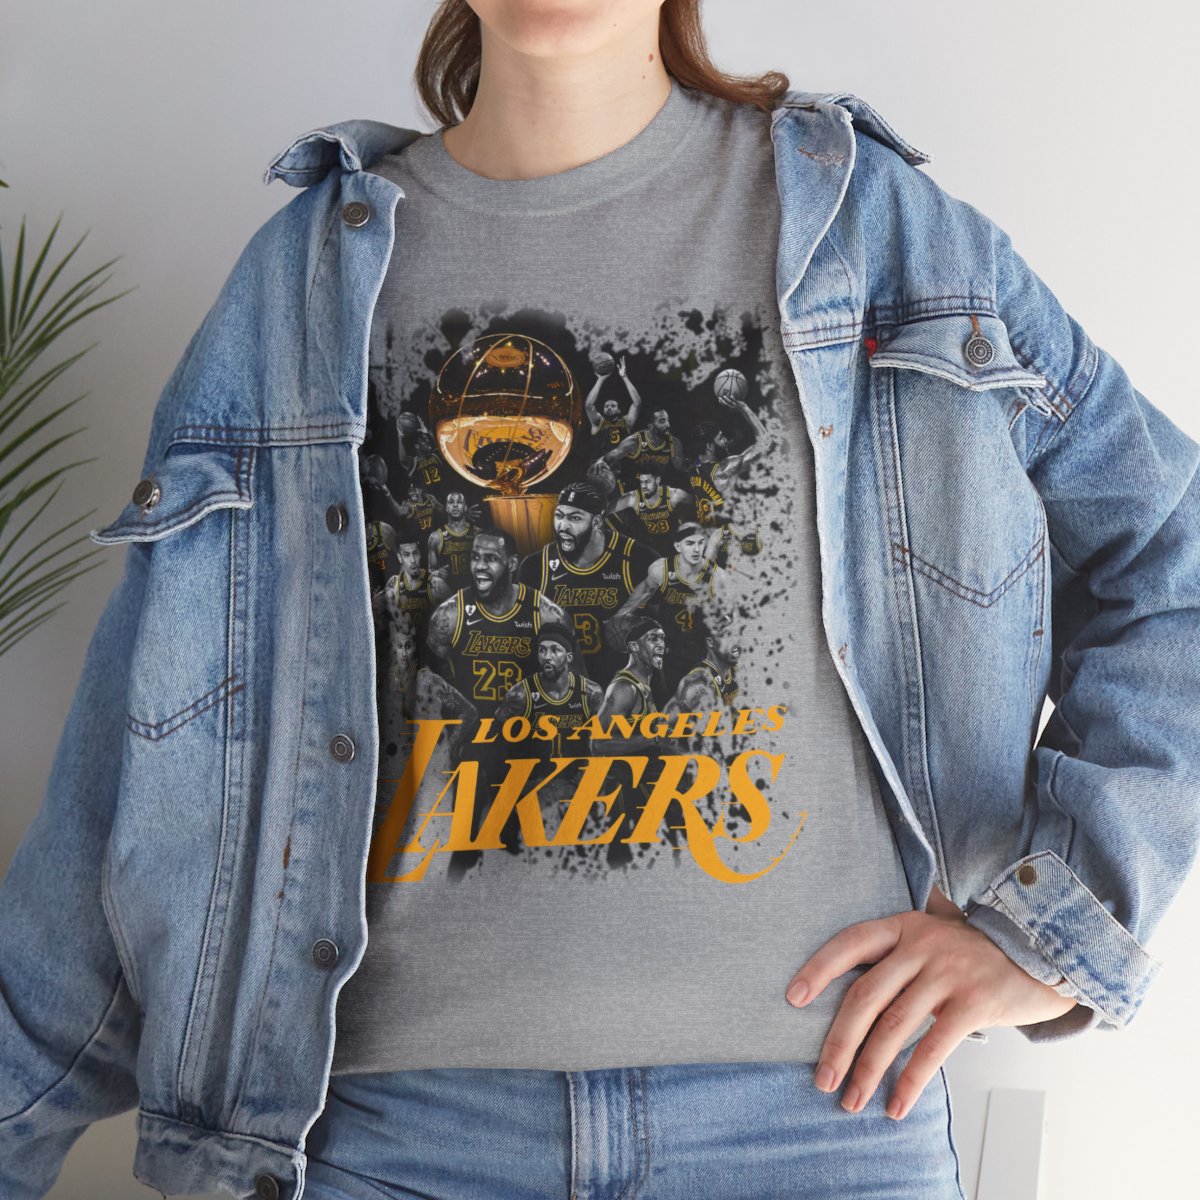 Los Angeles Lakers High Quality Printed Unisex Heavy Cotton T-Shirt